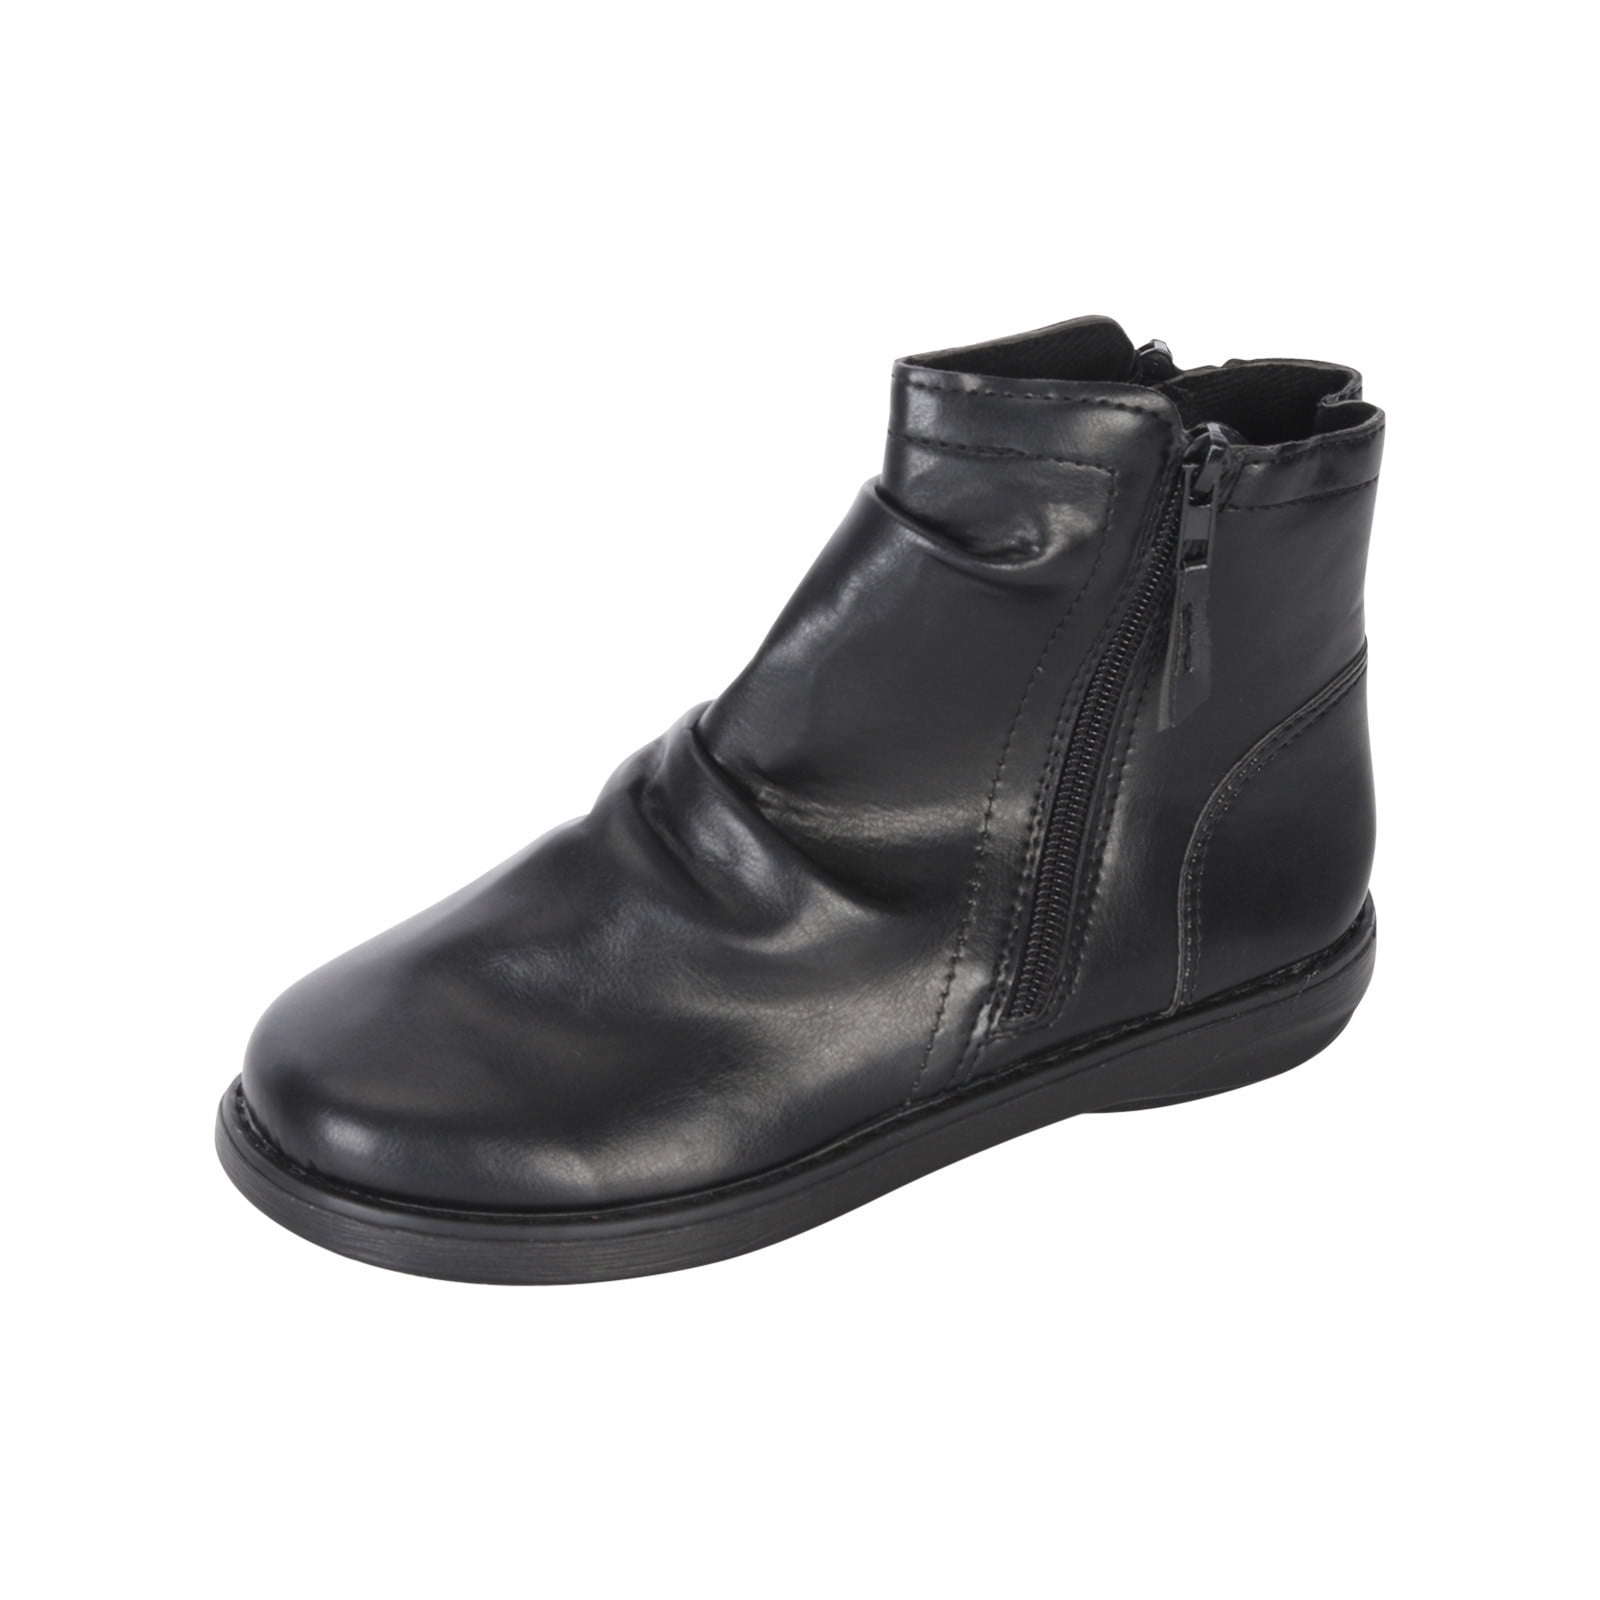 Silhouette Ankle Boot - Women - Shoes